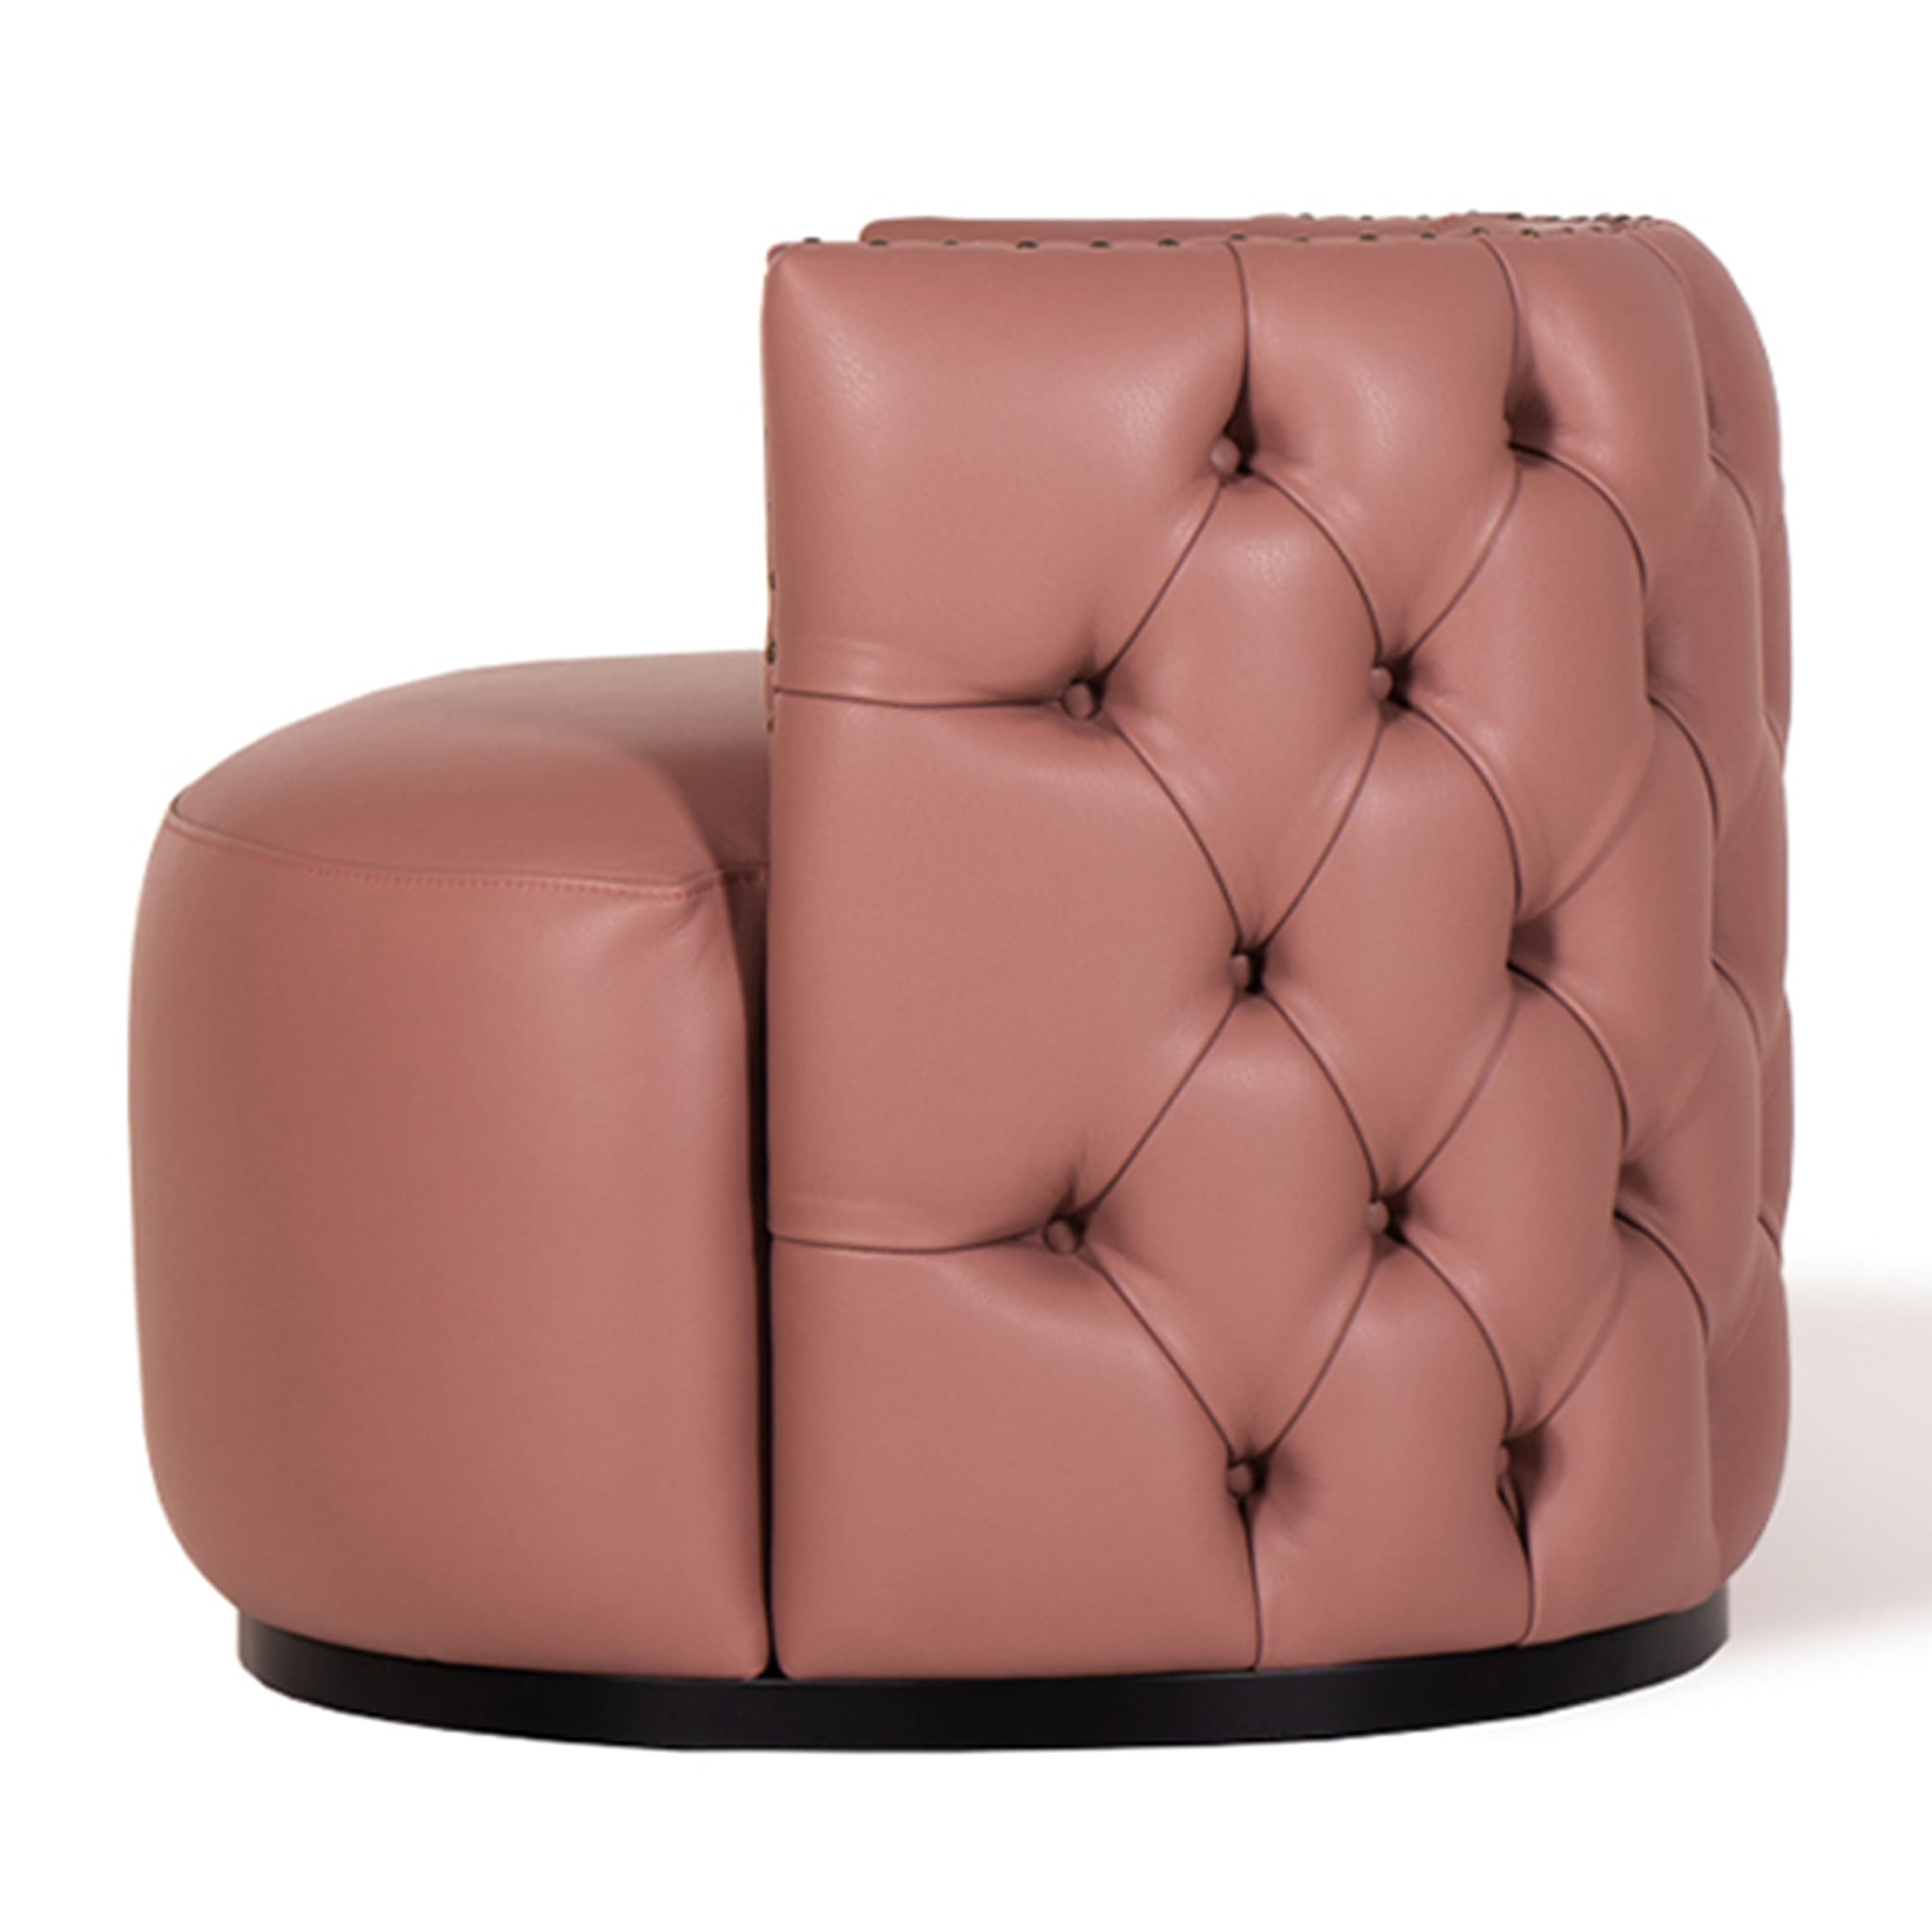 Petra Leather Armchair by Marco & Giulio Mantellassi - Alternative view 3